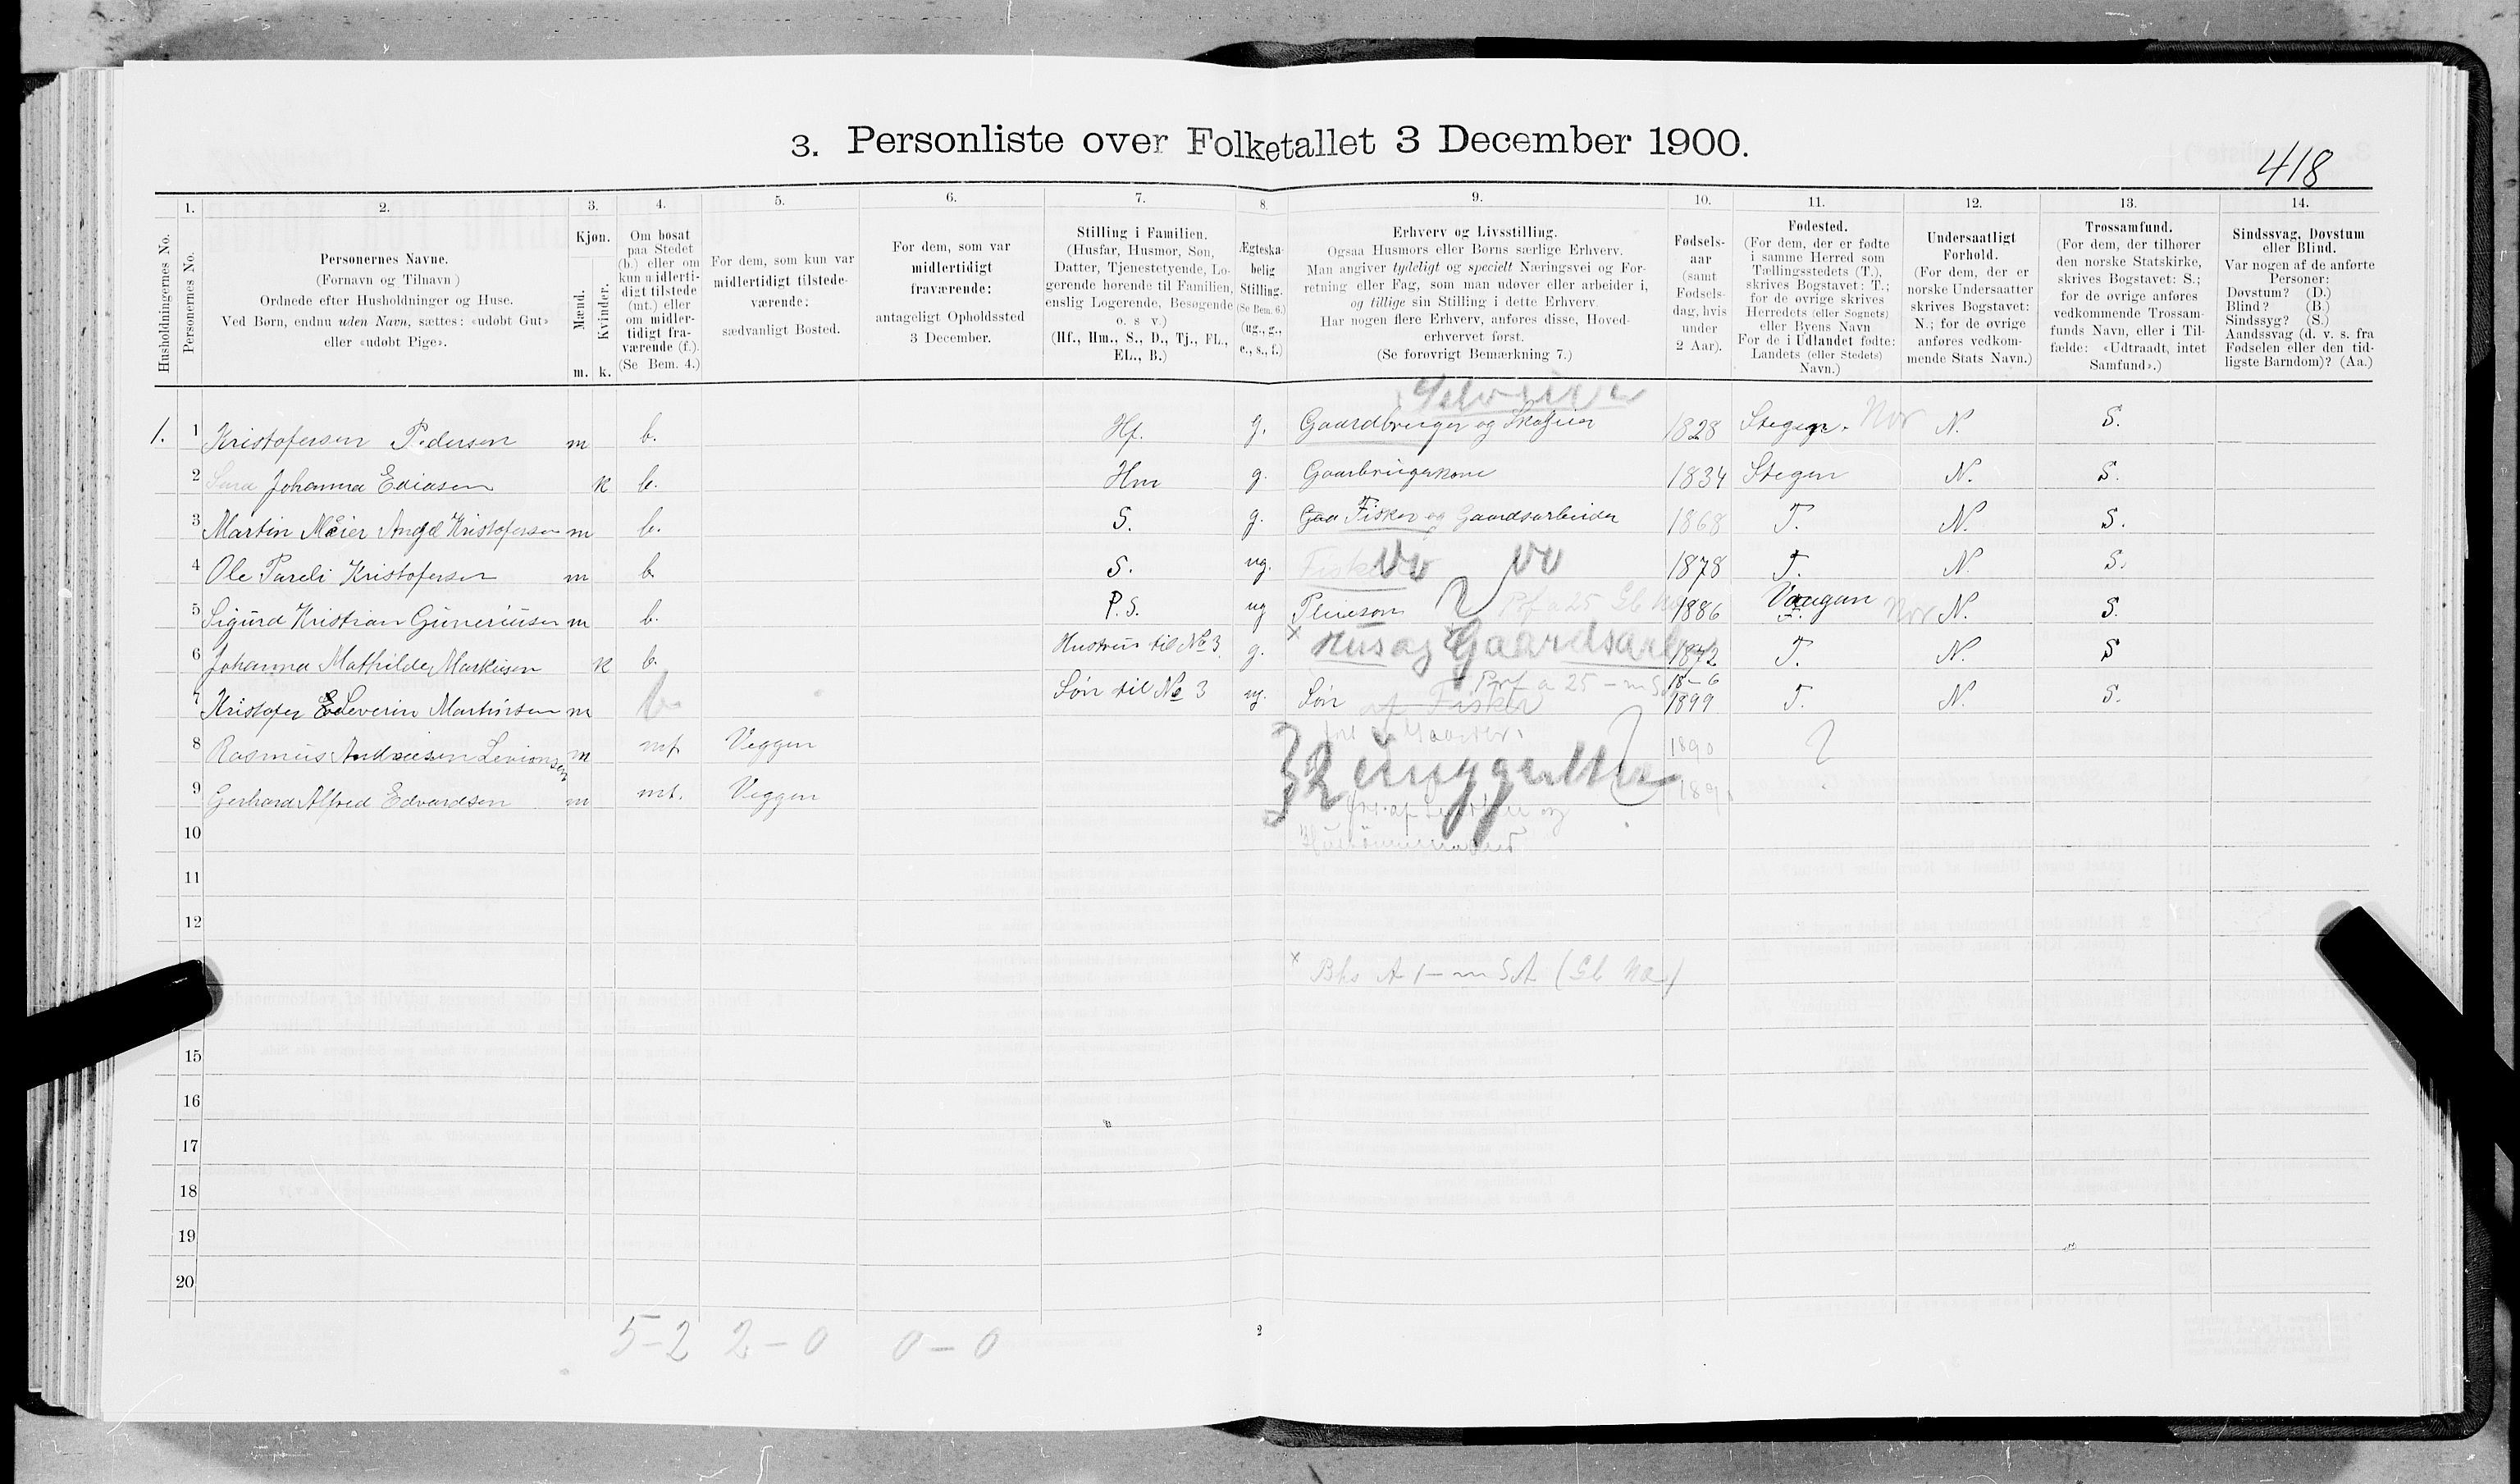 SAT, 1900 census for Hamarøy, 1900, p. 910